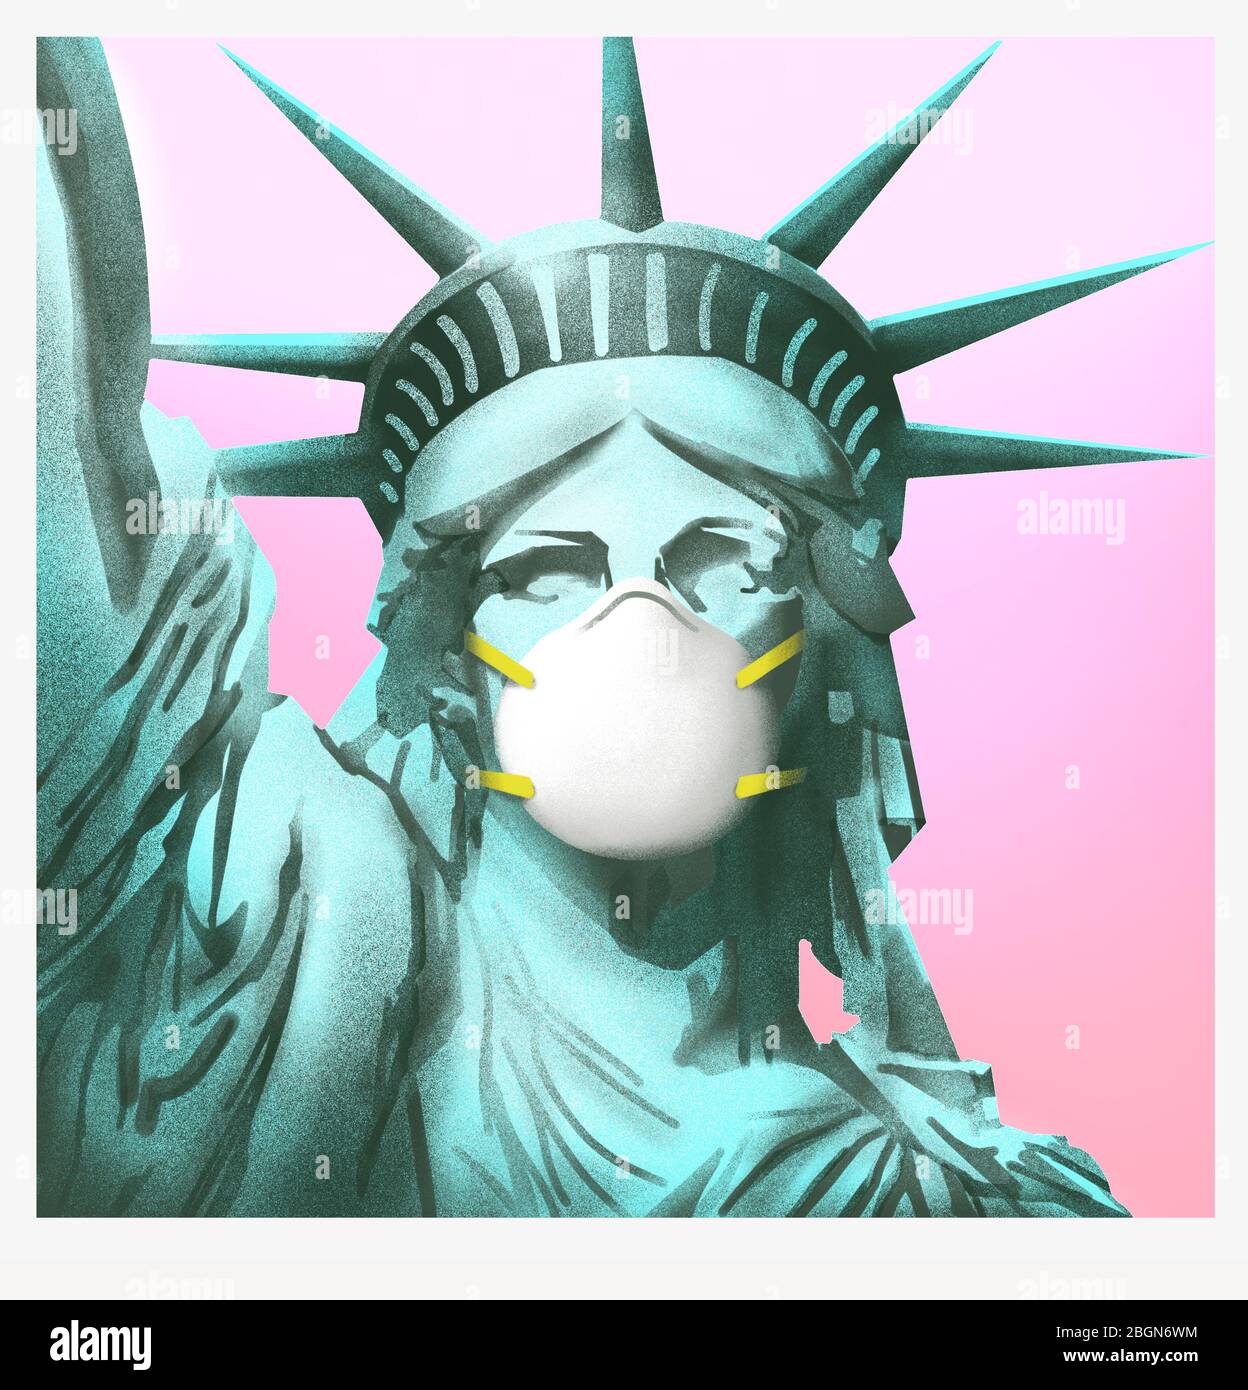 Statue of Liberty with a face mask. N95 face mask on Statue of Liberty. Stock Photo